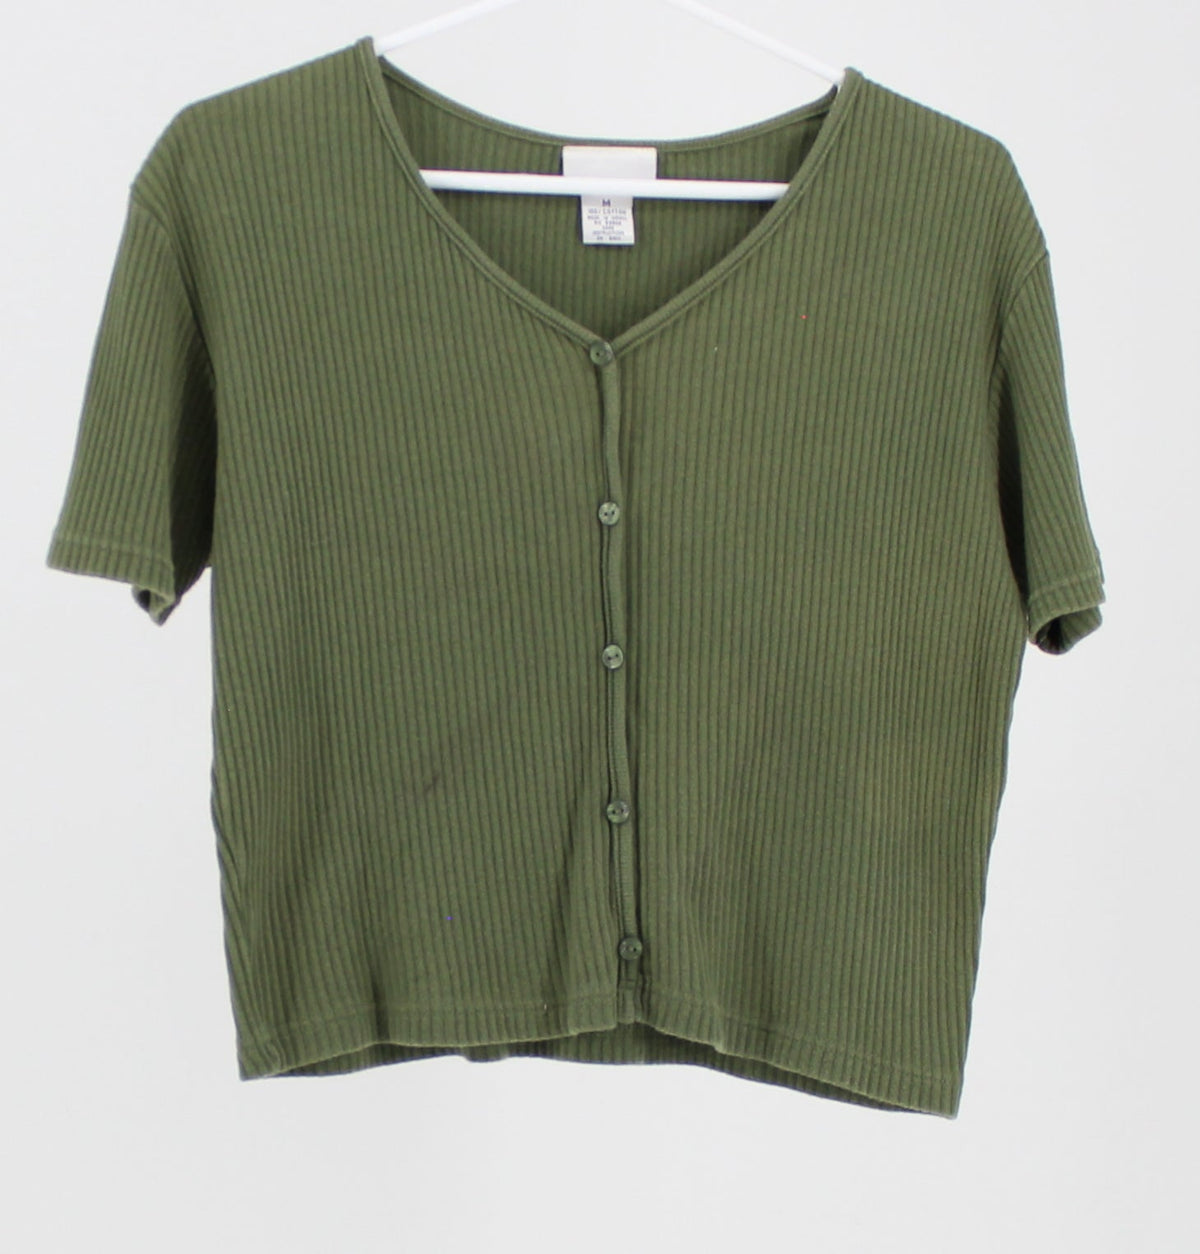 Weathervane green ribbed short sleeve button up shirt